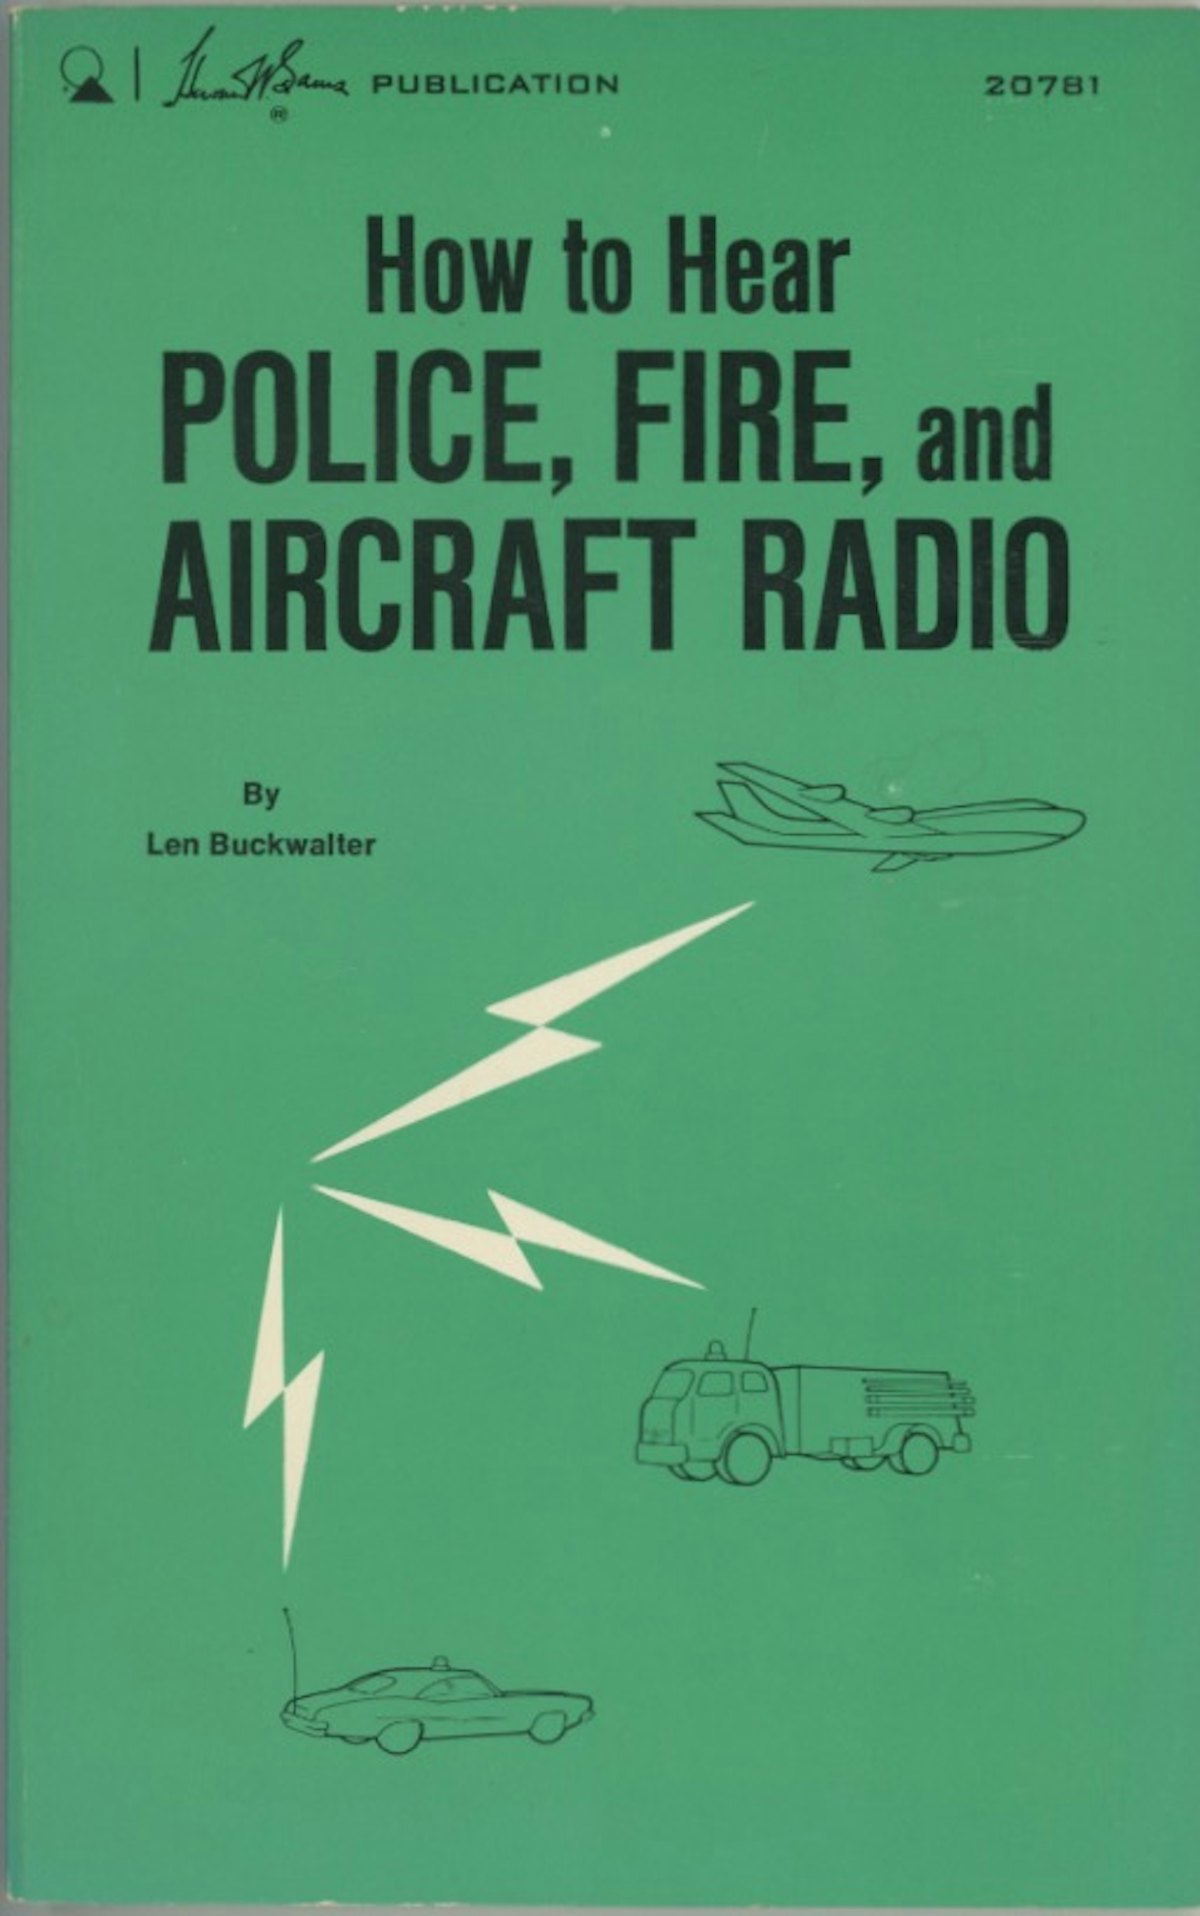 How to Hear Police, Fire and Aircraft Radio